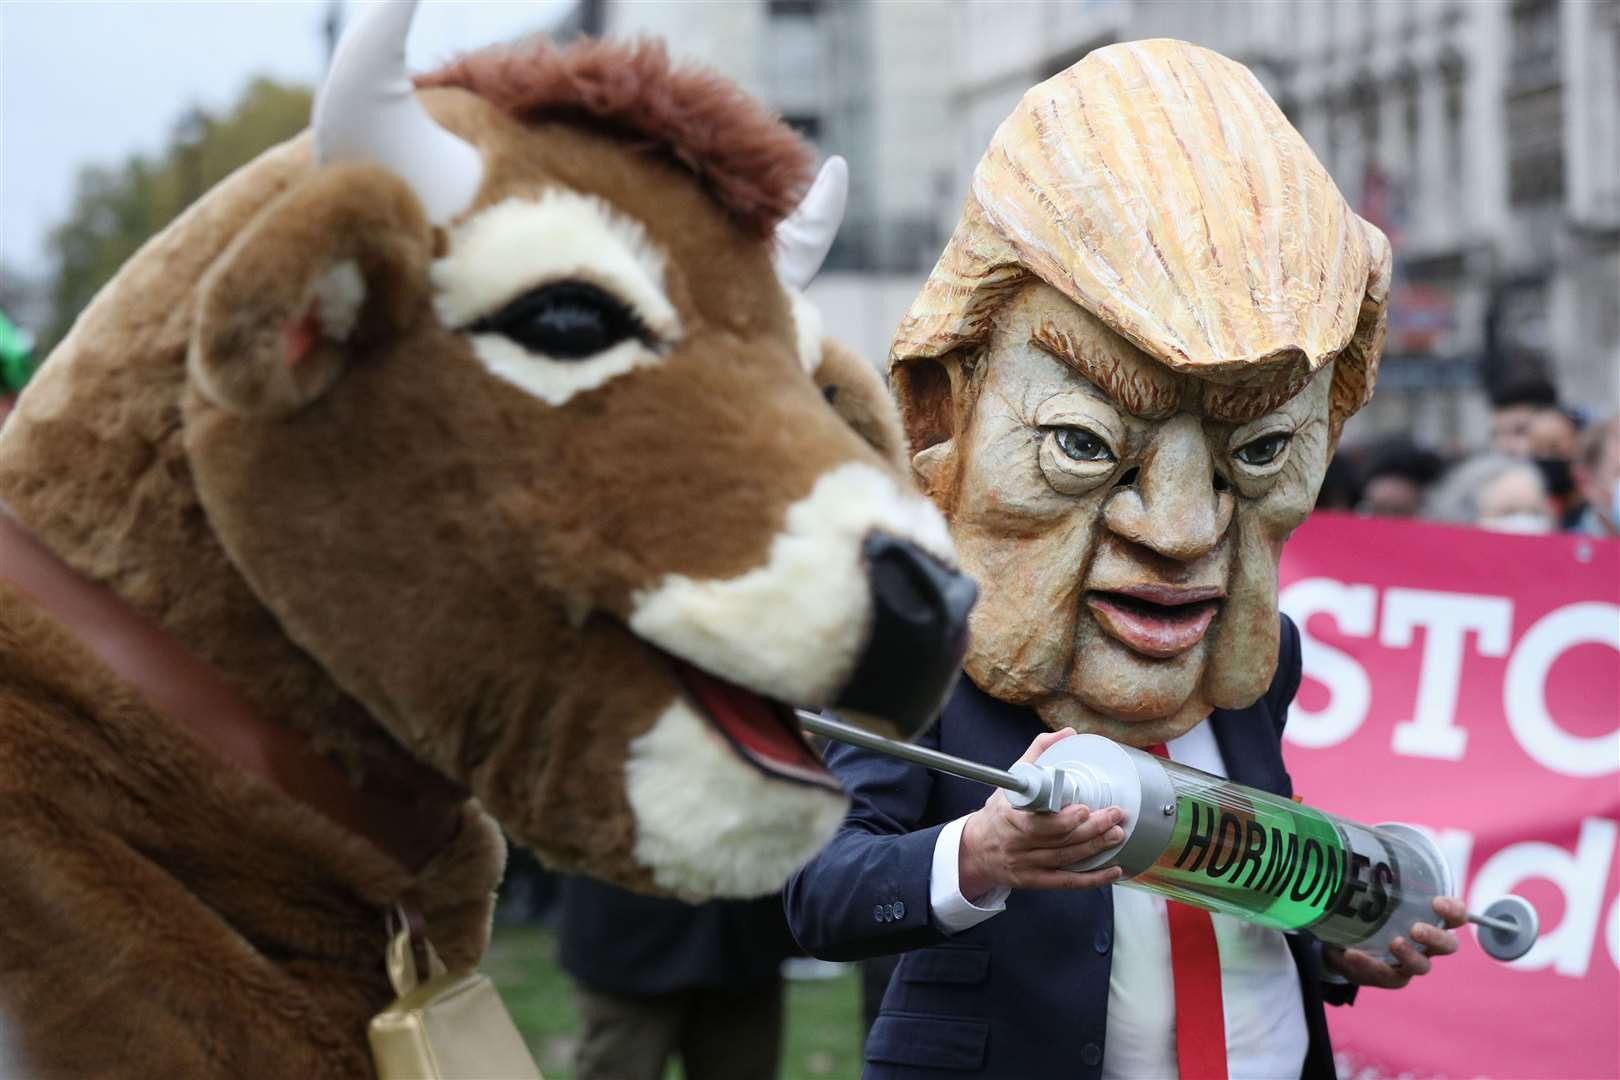 A protest in Parliament Square featured a demonstrator dressed as Donald Trump and a pantomime cow (Jonathan Brady/PA)